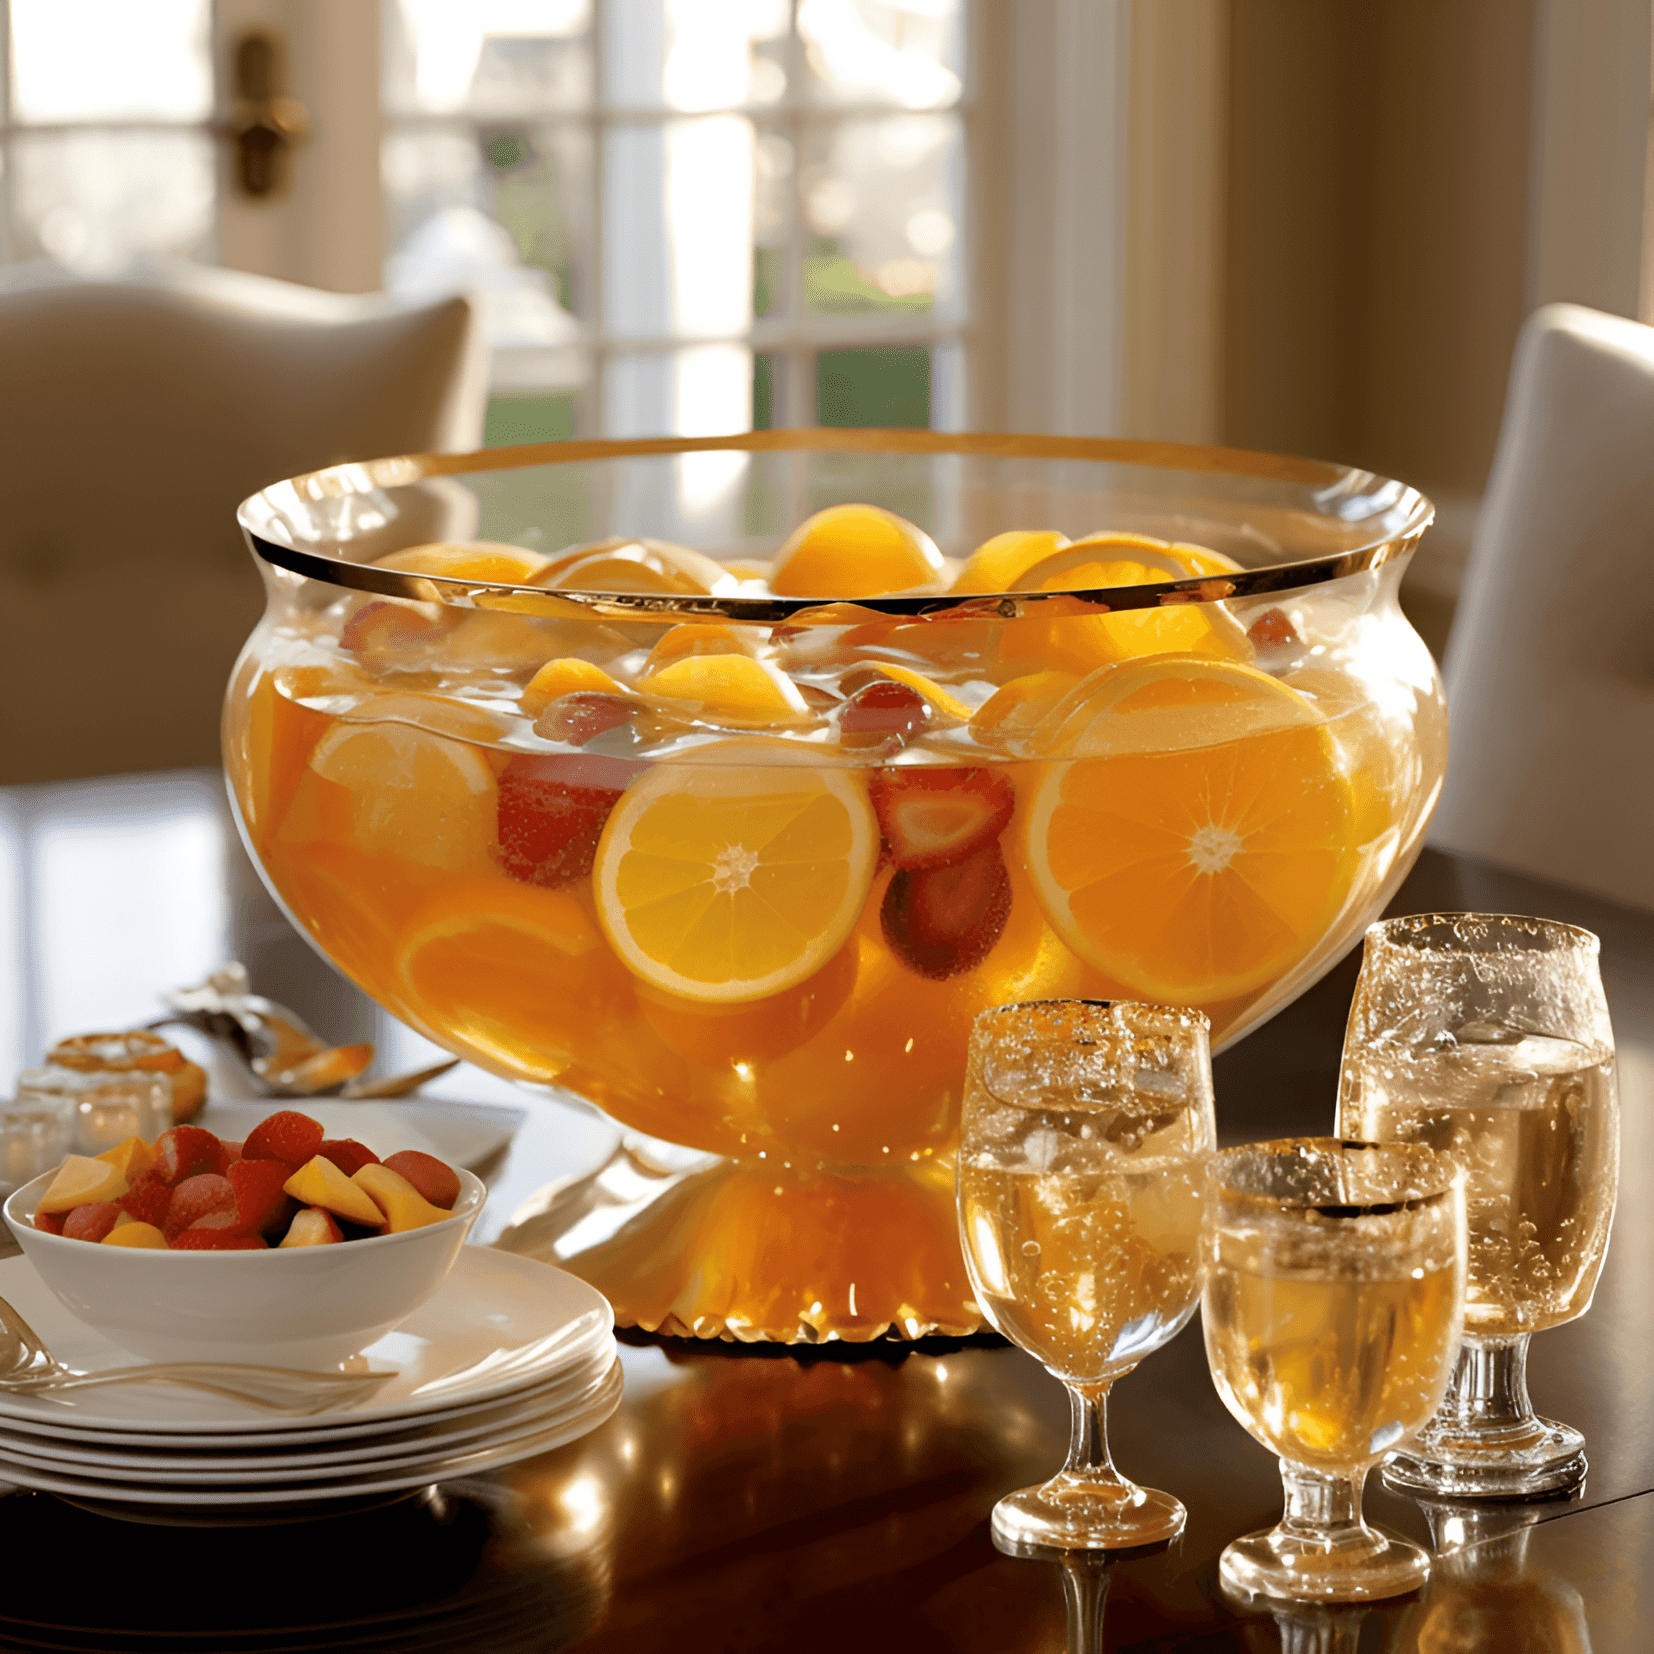 Champagne Punch Cocktail Recipe - Champagne Punch is a delightful blend of sweet, fruity, and effervescent flavors. The champagne adds a crisp, bubbly sensation, while the fruit juices and liqueurs provide a refreshing sweetness. The taste is well-balanced, with a hint of tartness from the citrus fruits.